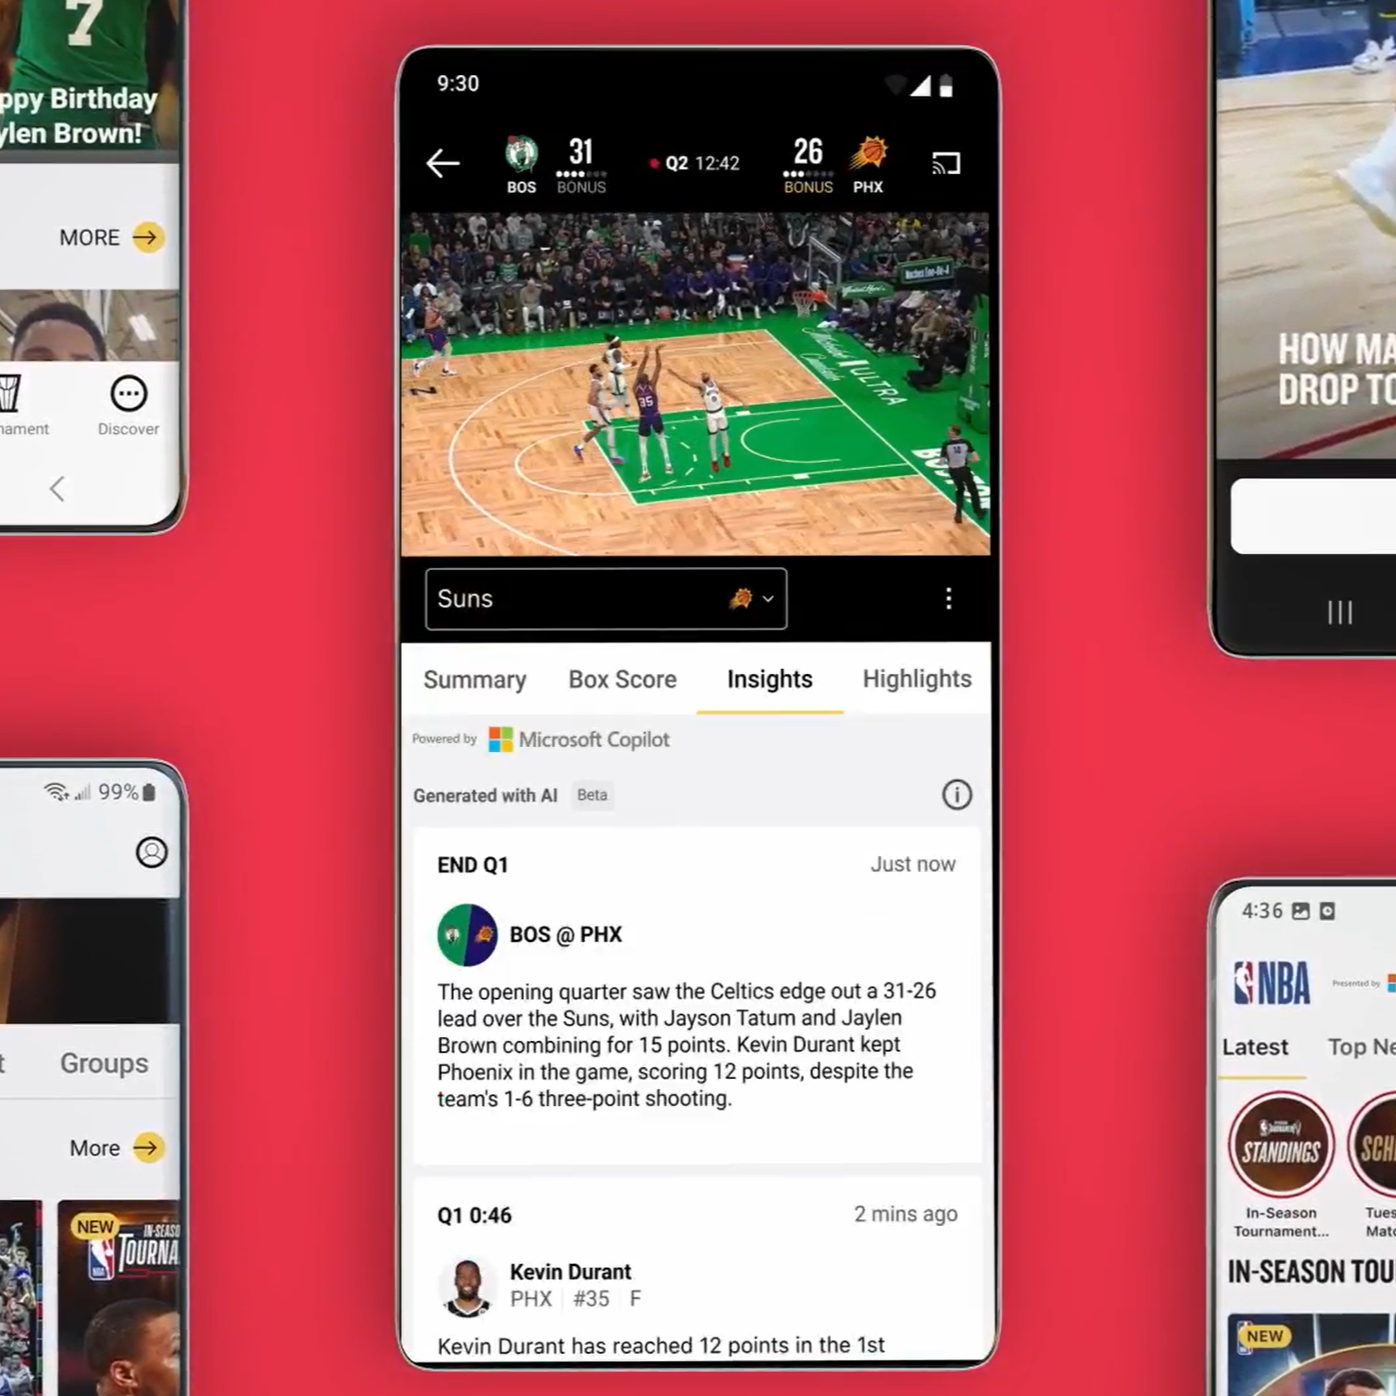 A screenshot of a smartphone showing a live basketball game between the boston celtics and the phoenix suns on a sports app.